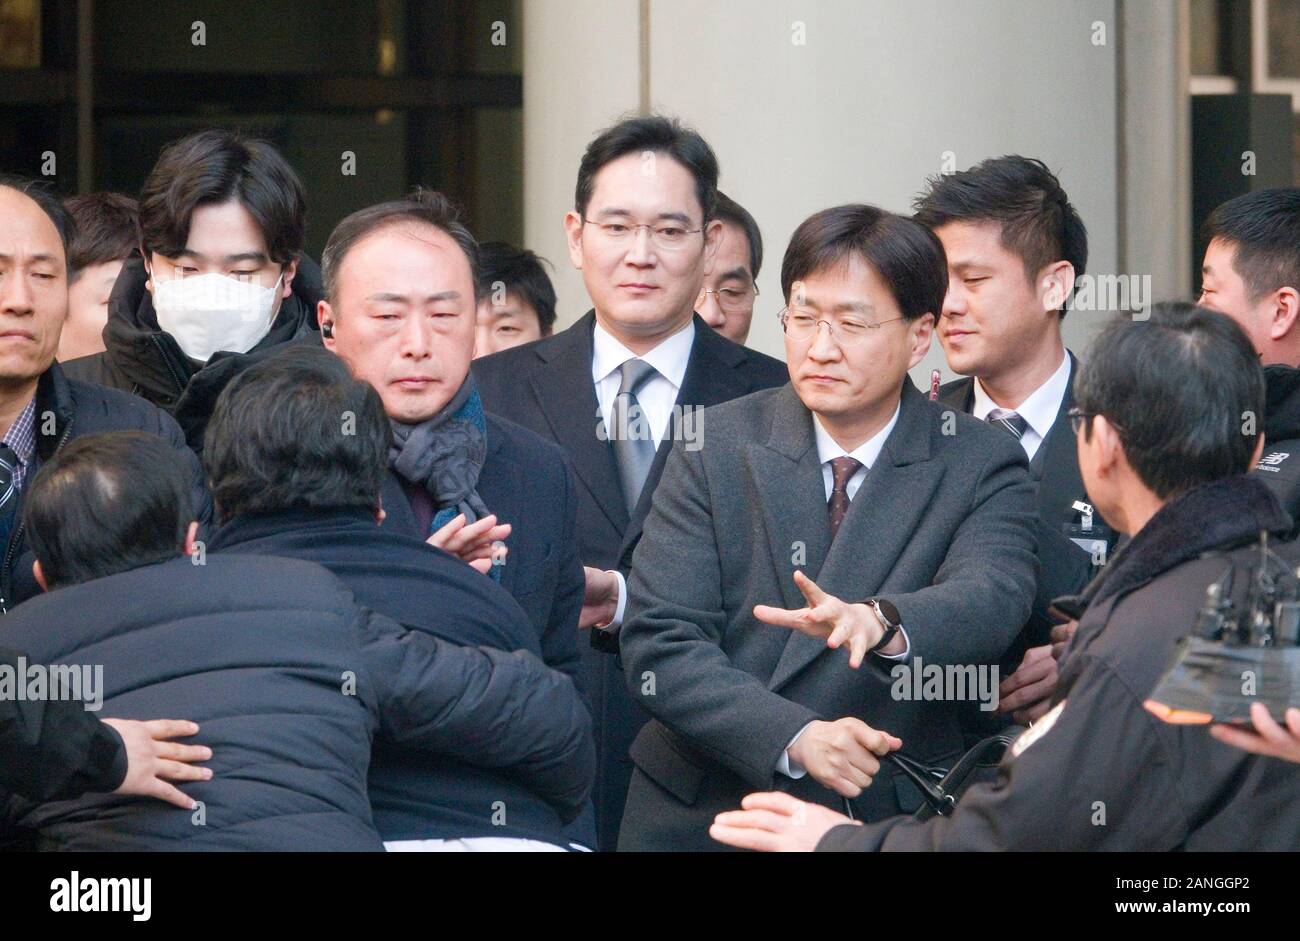 Seoul High Court in South Korea. 17th January, 2020. Lee Jae-Yong, Jan 17, 2020 : A former Samsung worker (front 2nd L ) protests against Samsung Electronics Vice Chairman Lee Jae-Yong (C) as the latter leaves after his trial at the Seoul High Court in Seoul, South Korea. Dozens of former Samsung workers were holding a protest against Samsung which they insist, fired them unfairly and spied on them who were trying to organize a labor union. Credit: Aflo Co. Ltd./Alamy Live News Stock Photo